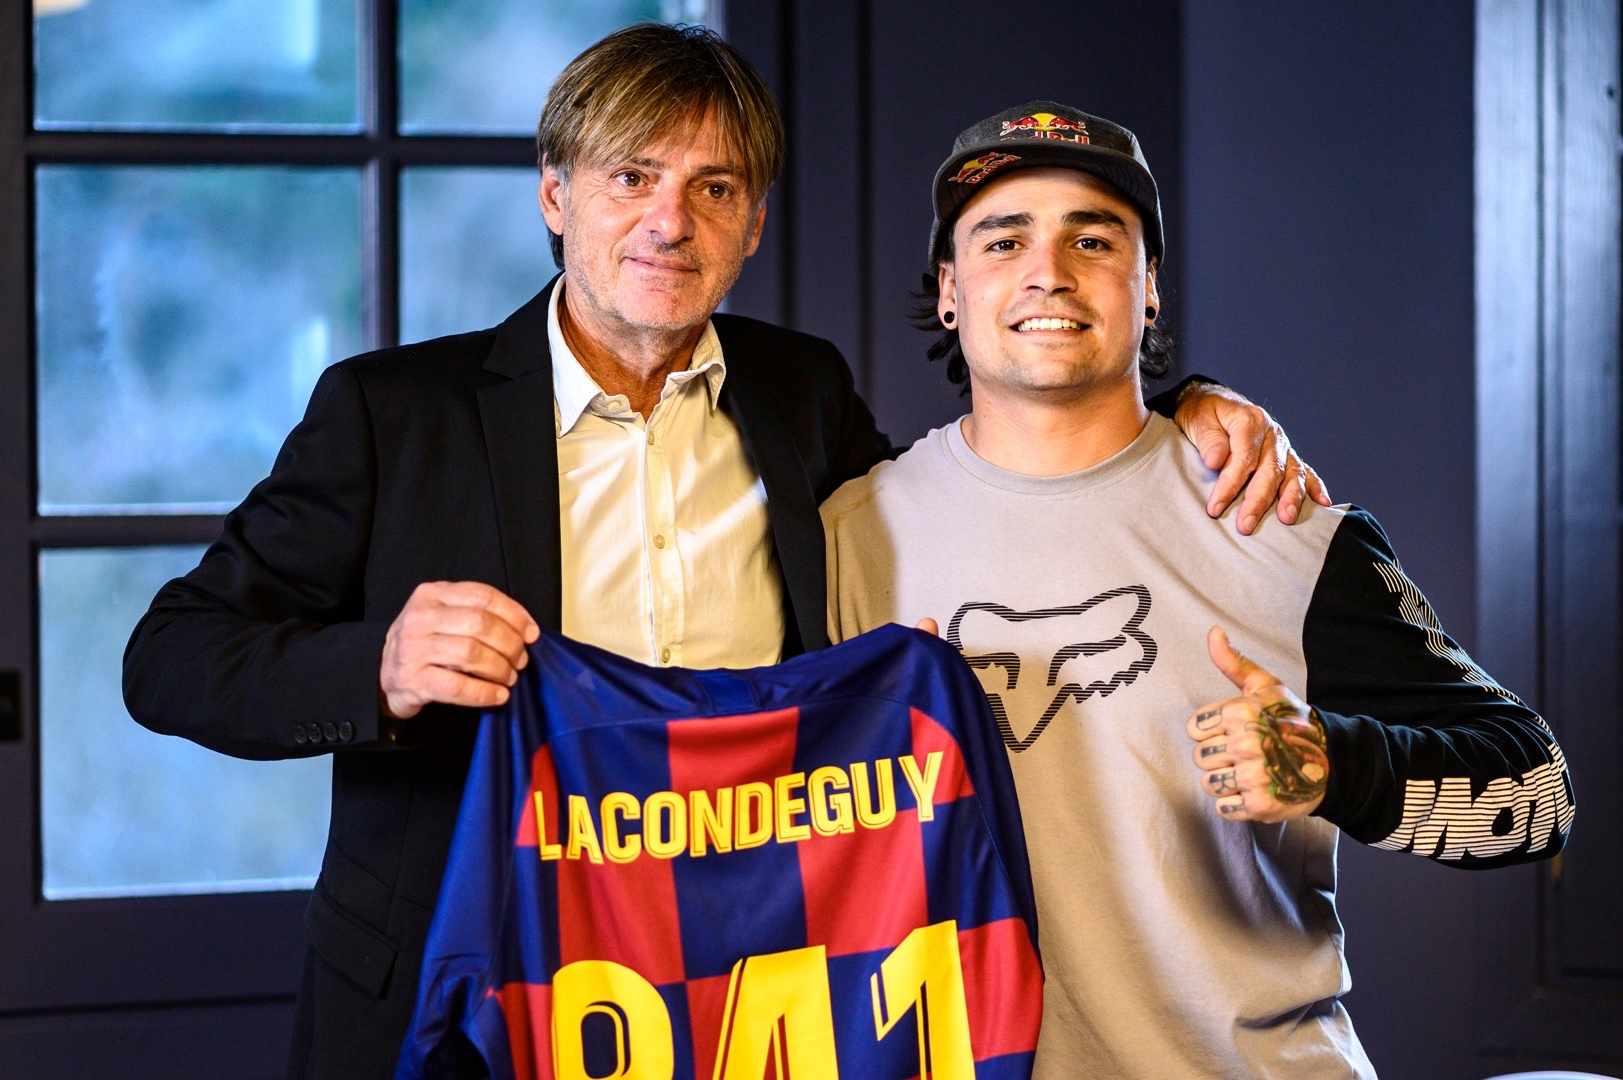 Andreu Lacondeguy Signs With COMMENCAL Football Club